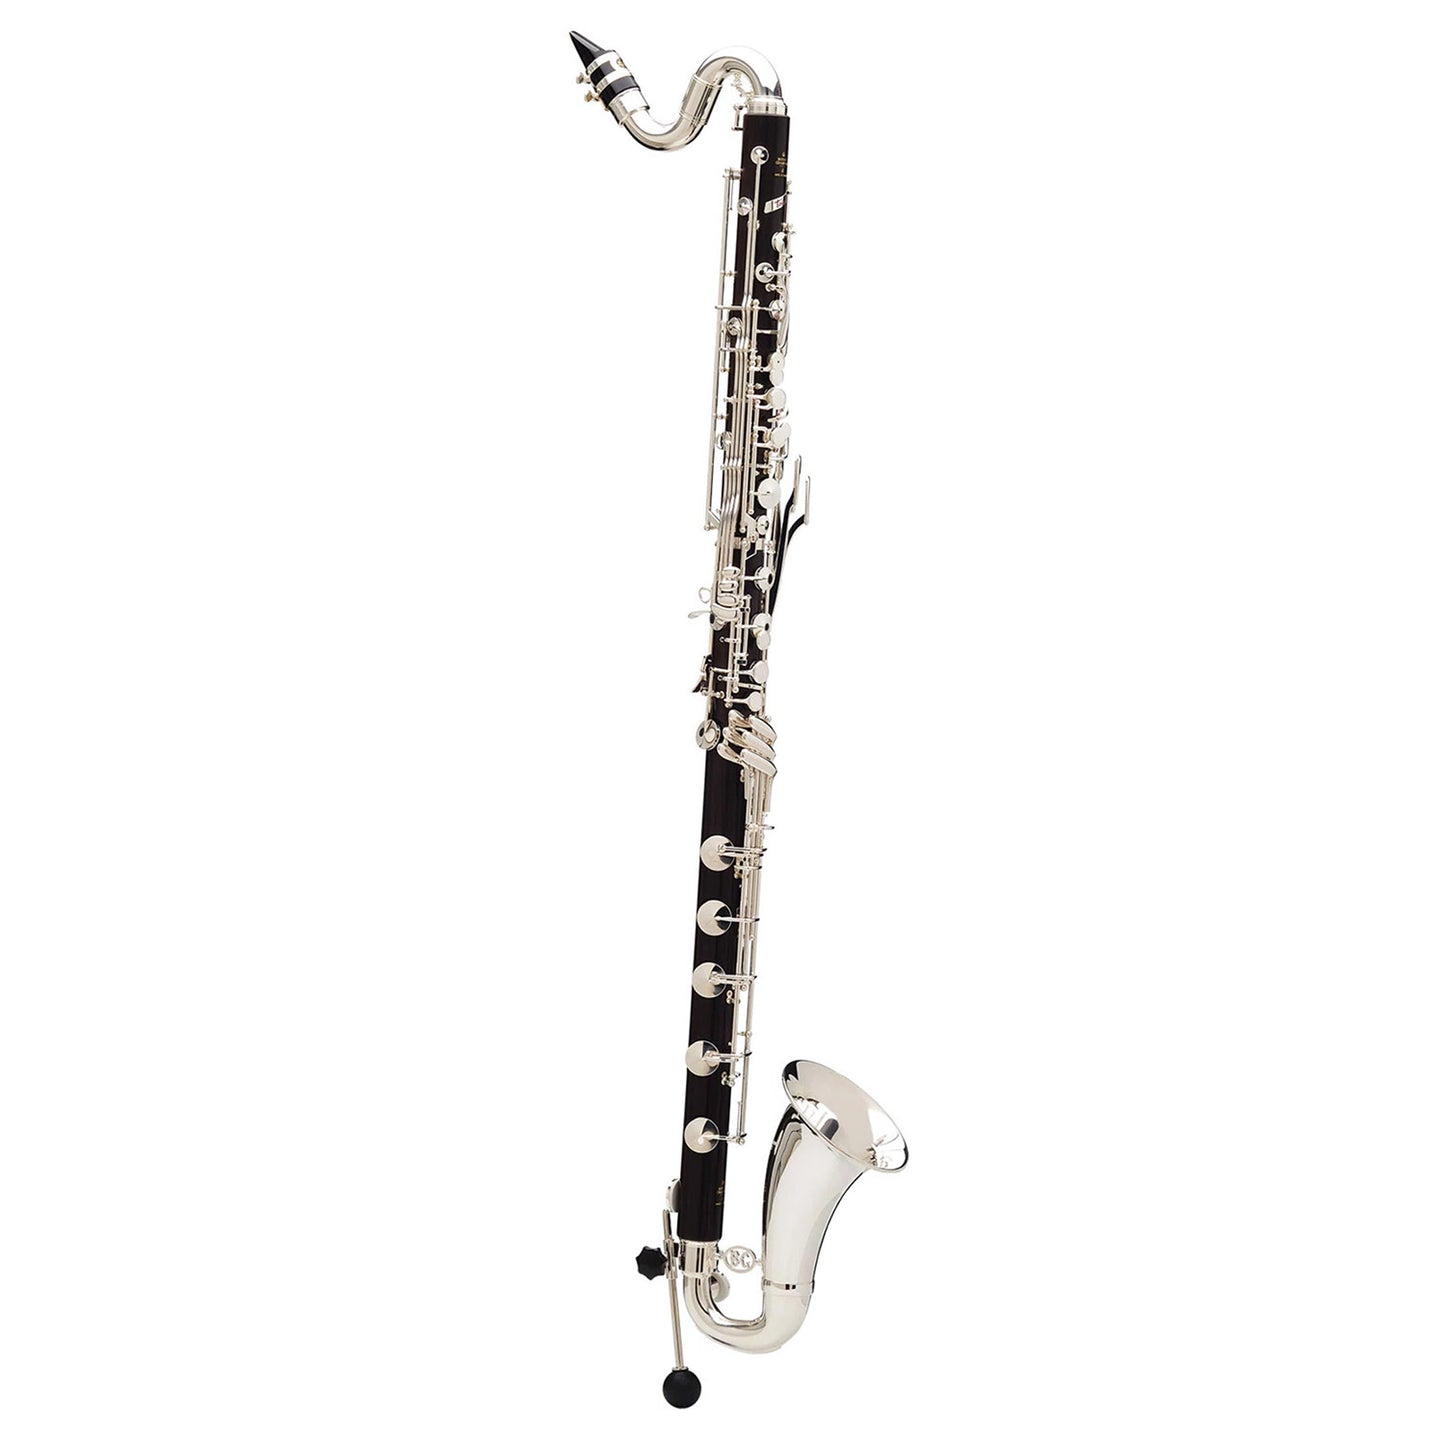 overall view of Buffet Tosca low C bass clarinet